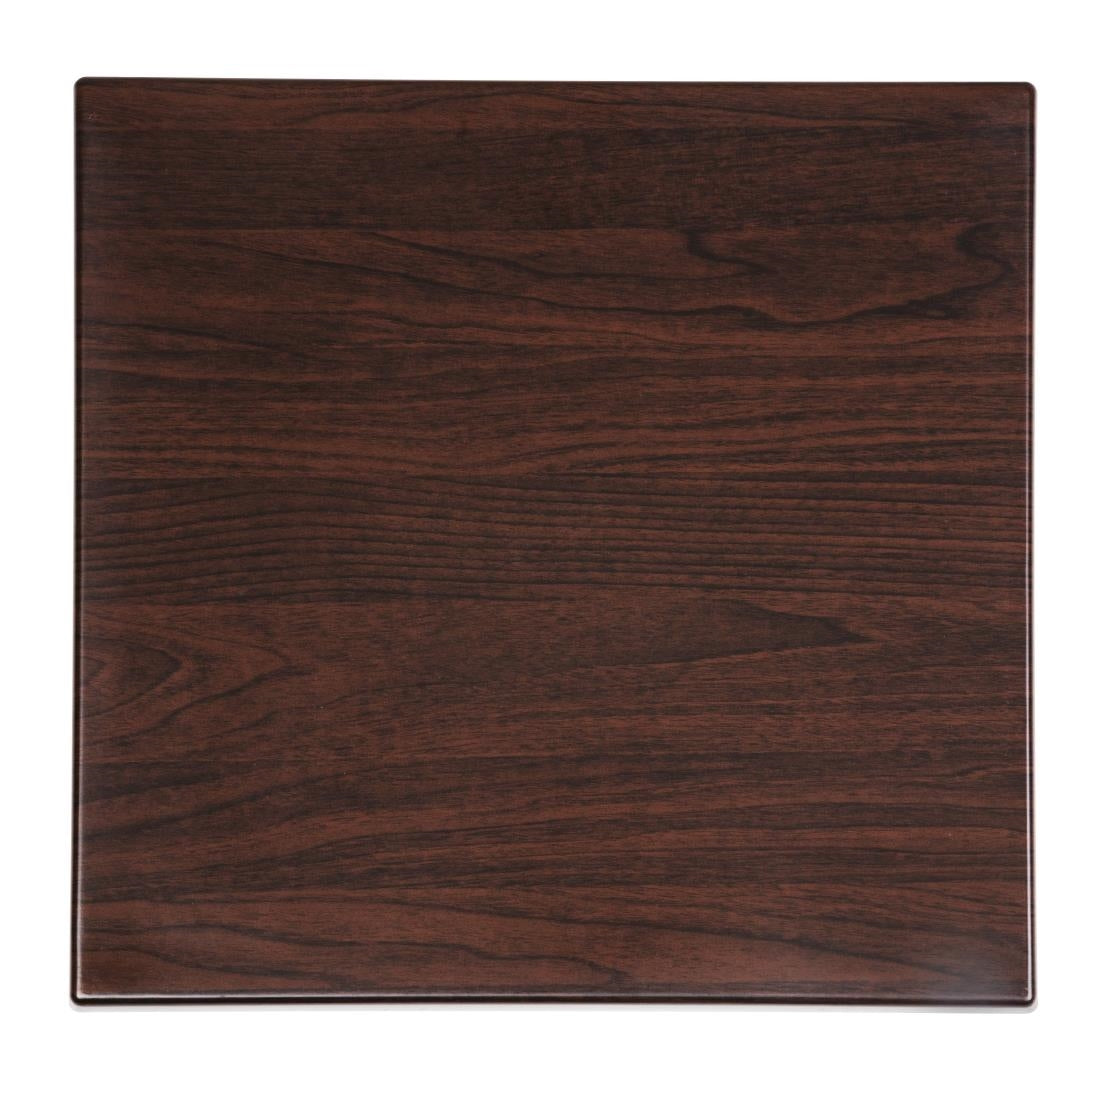 GG635 Bolero Pre-drilled Square Table Top Dark Brown 600mm JD Catering Equipment Solutions Ltd